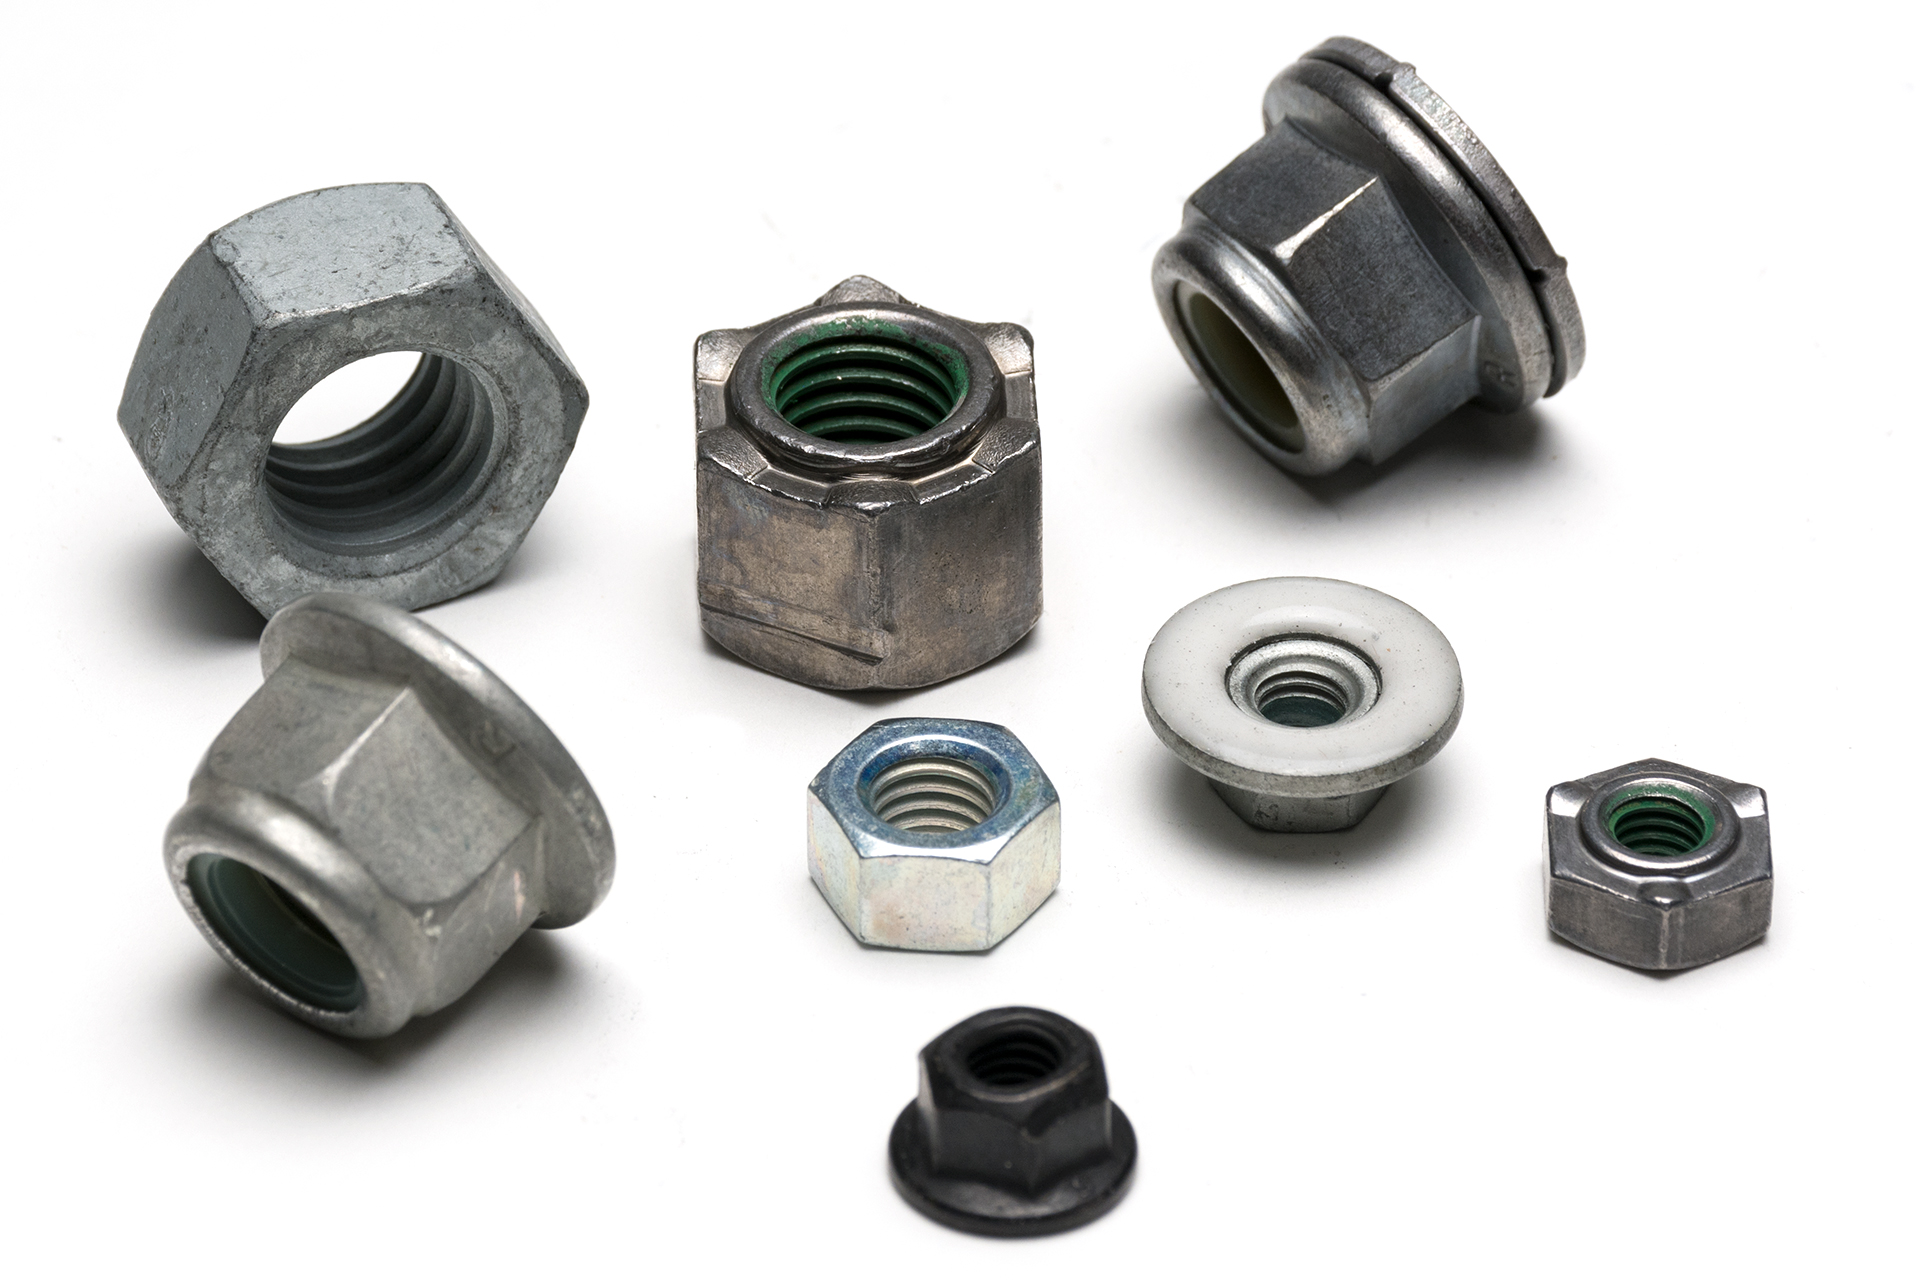 Automotive Nuts for Full Service Provider | Ram-Bul